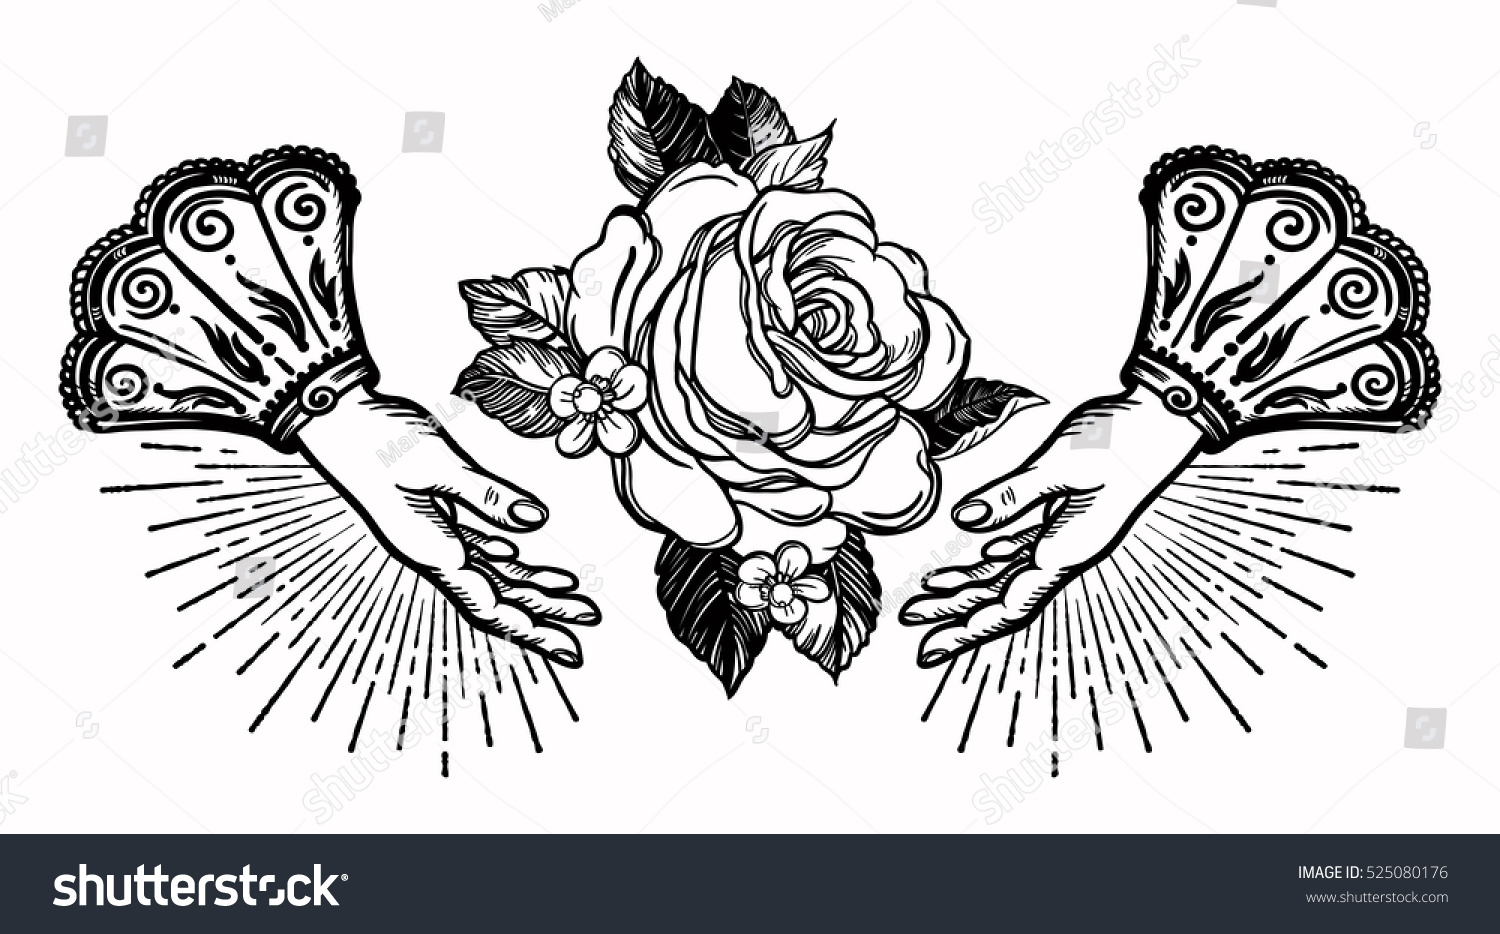 Ornate old fashioned hands and elegant vintage rose flower. Isolated vector illustration. Victorian motif, retro style art, flash tattoo design element.

 #525080176